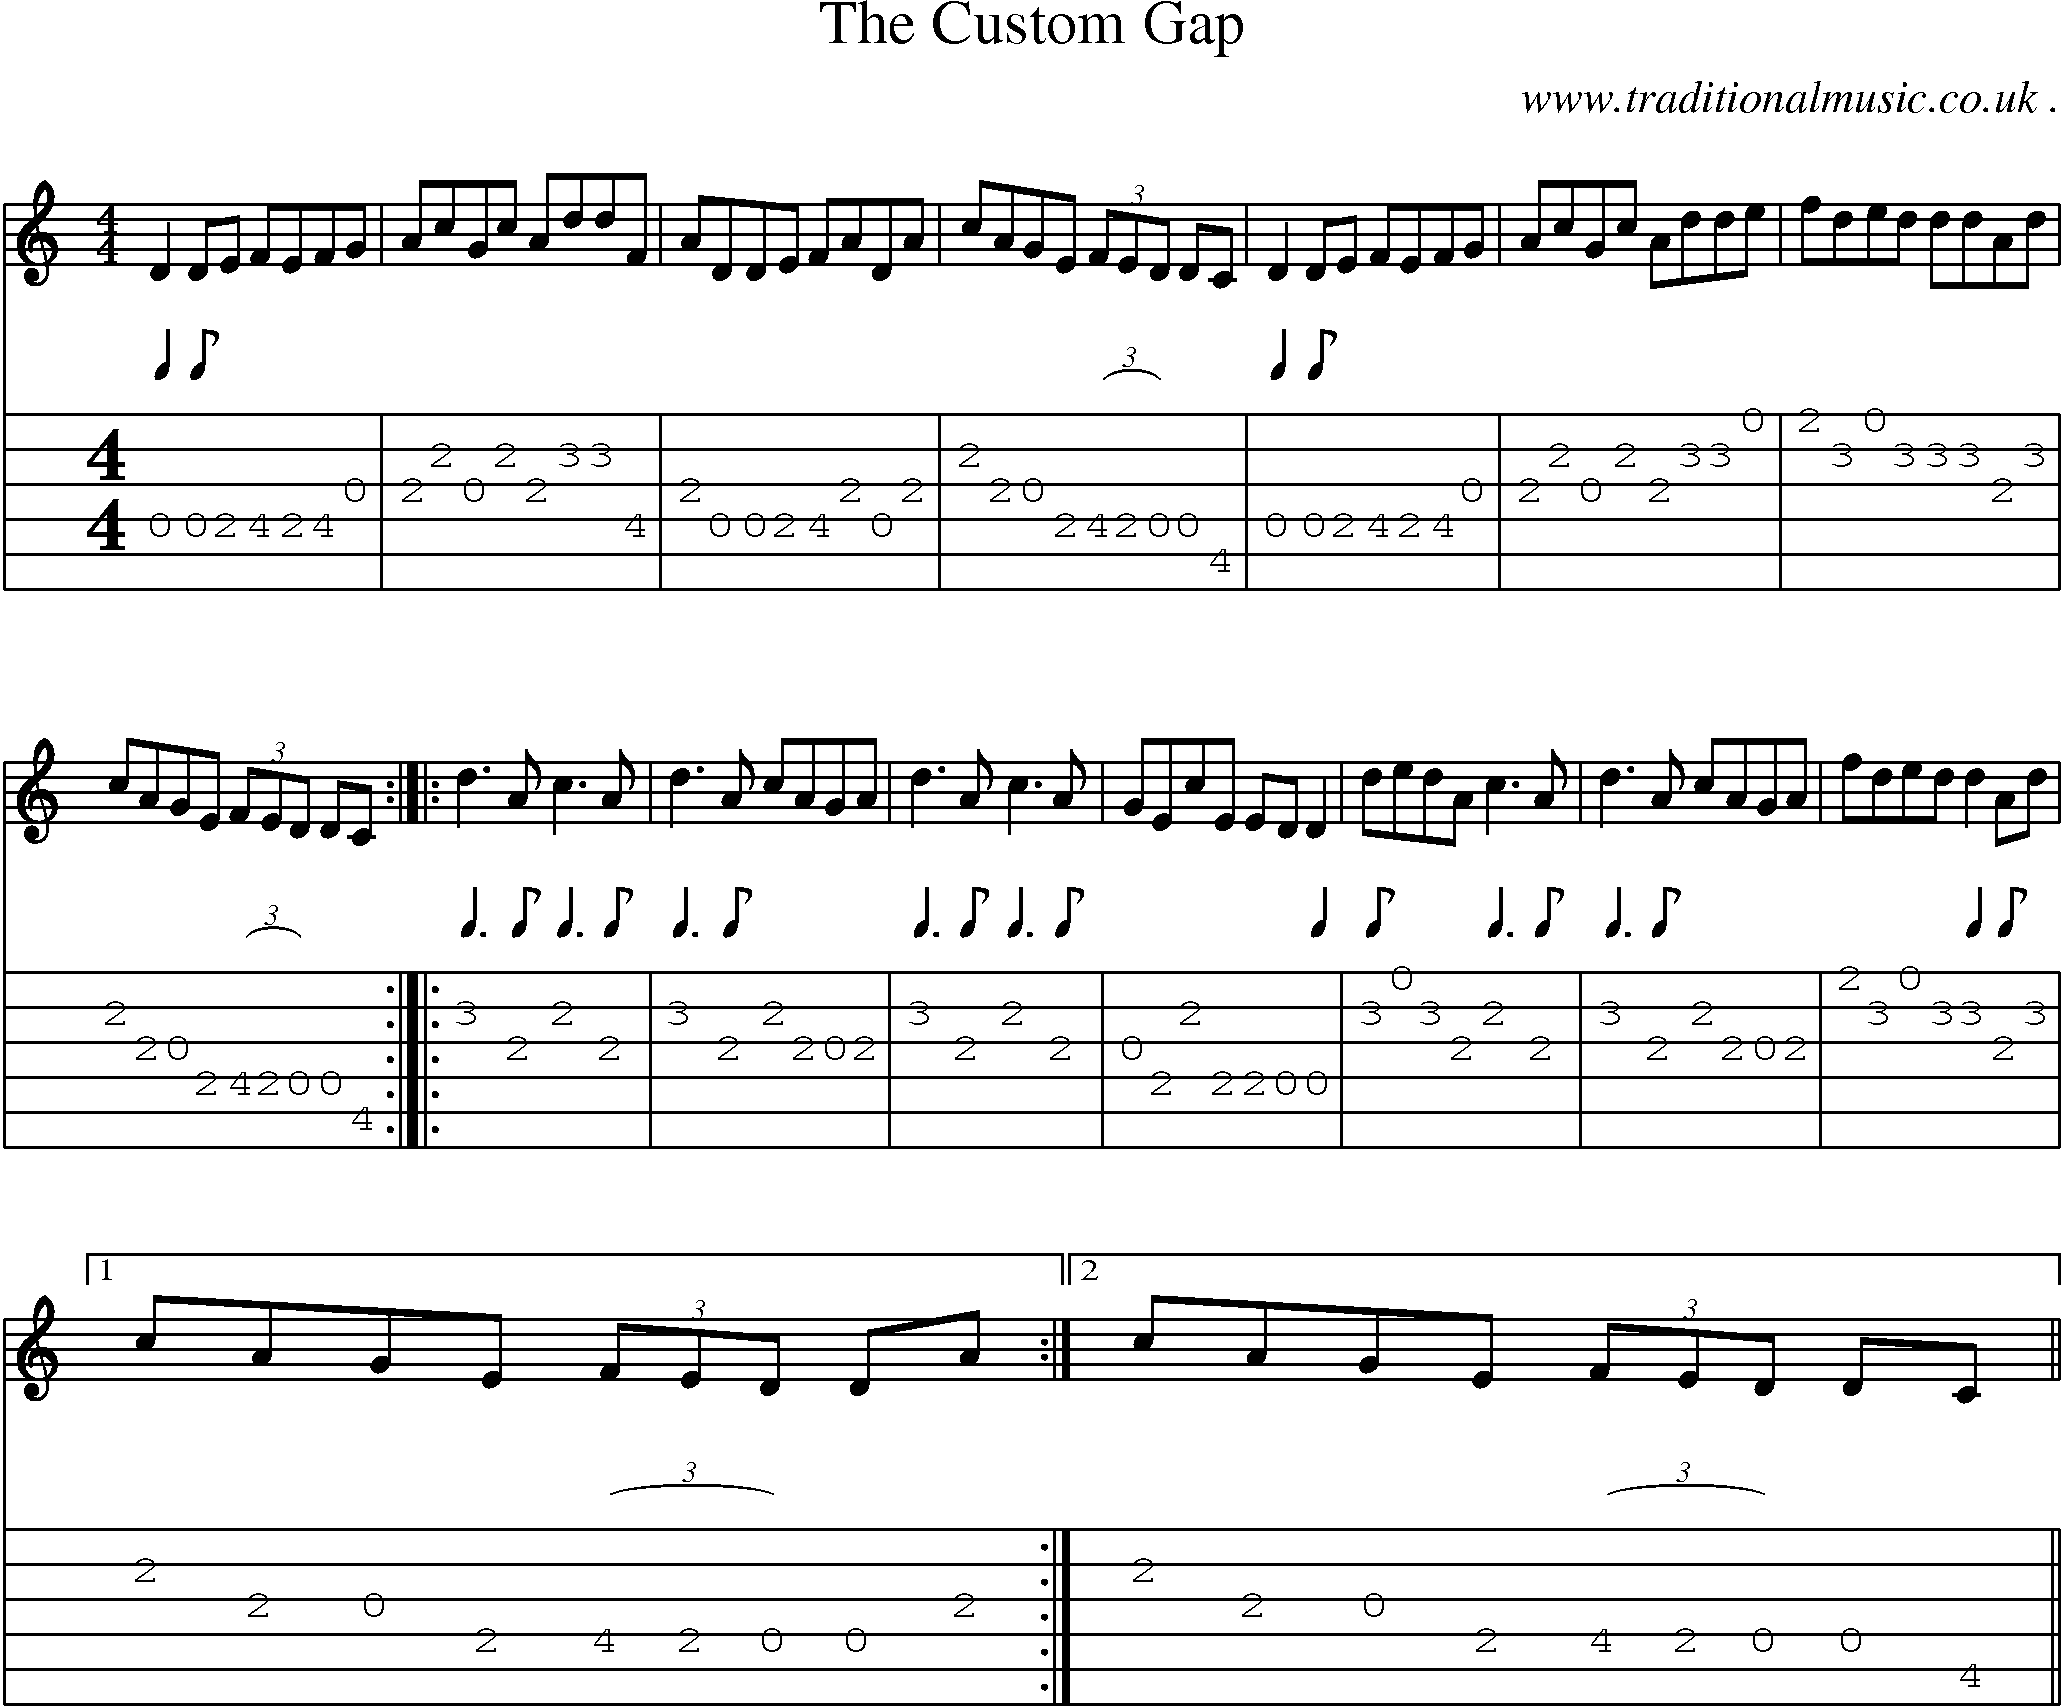 Sheet-Music and Guitar Tabs for The Custom Gap